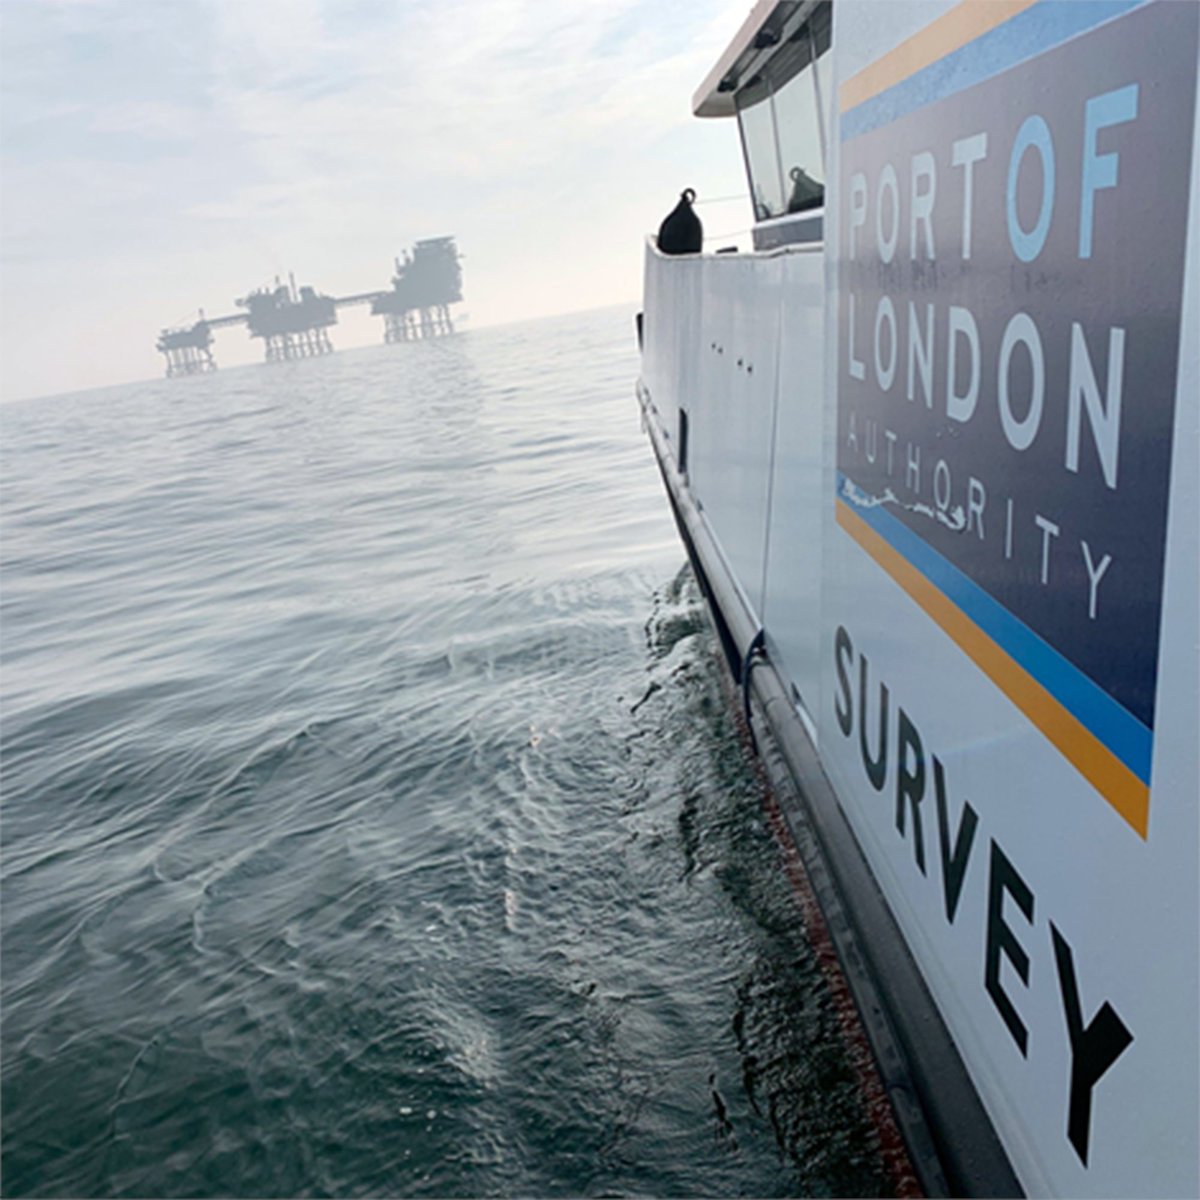 Our Hydrography team can survey your key infrastructure assets in the #Thames Estuary and beyond.

How can they help your business? hubs.la/Q01MvSVM0 #WeKnowtheThames #PortofLondon #PortofInnovation #Hydrography